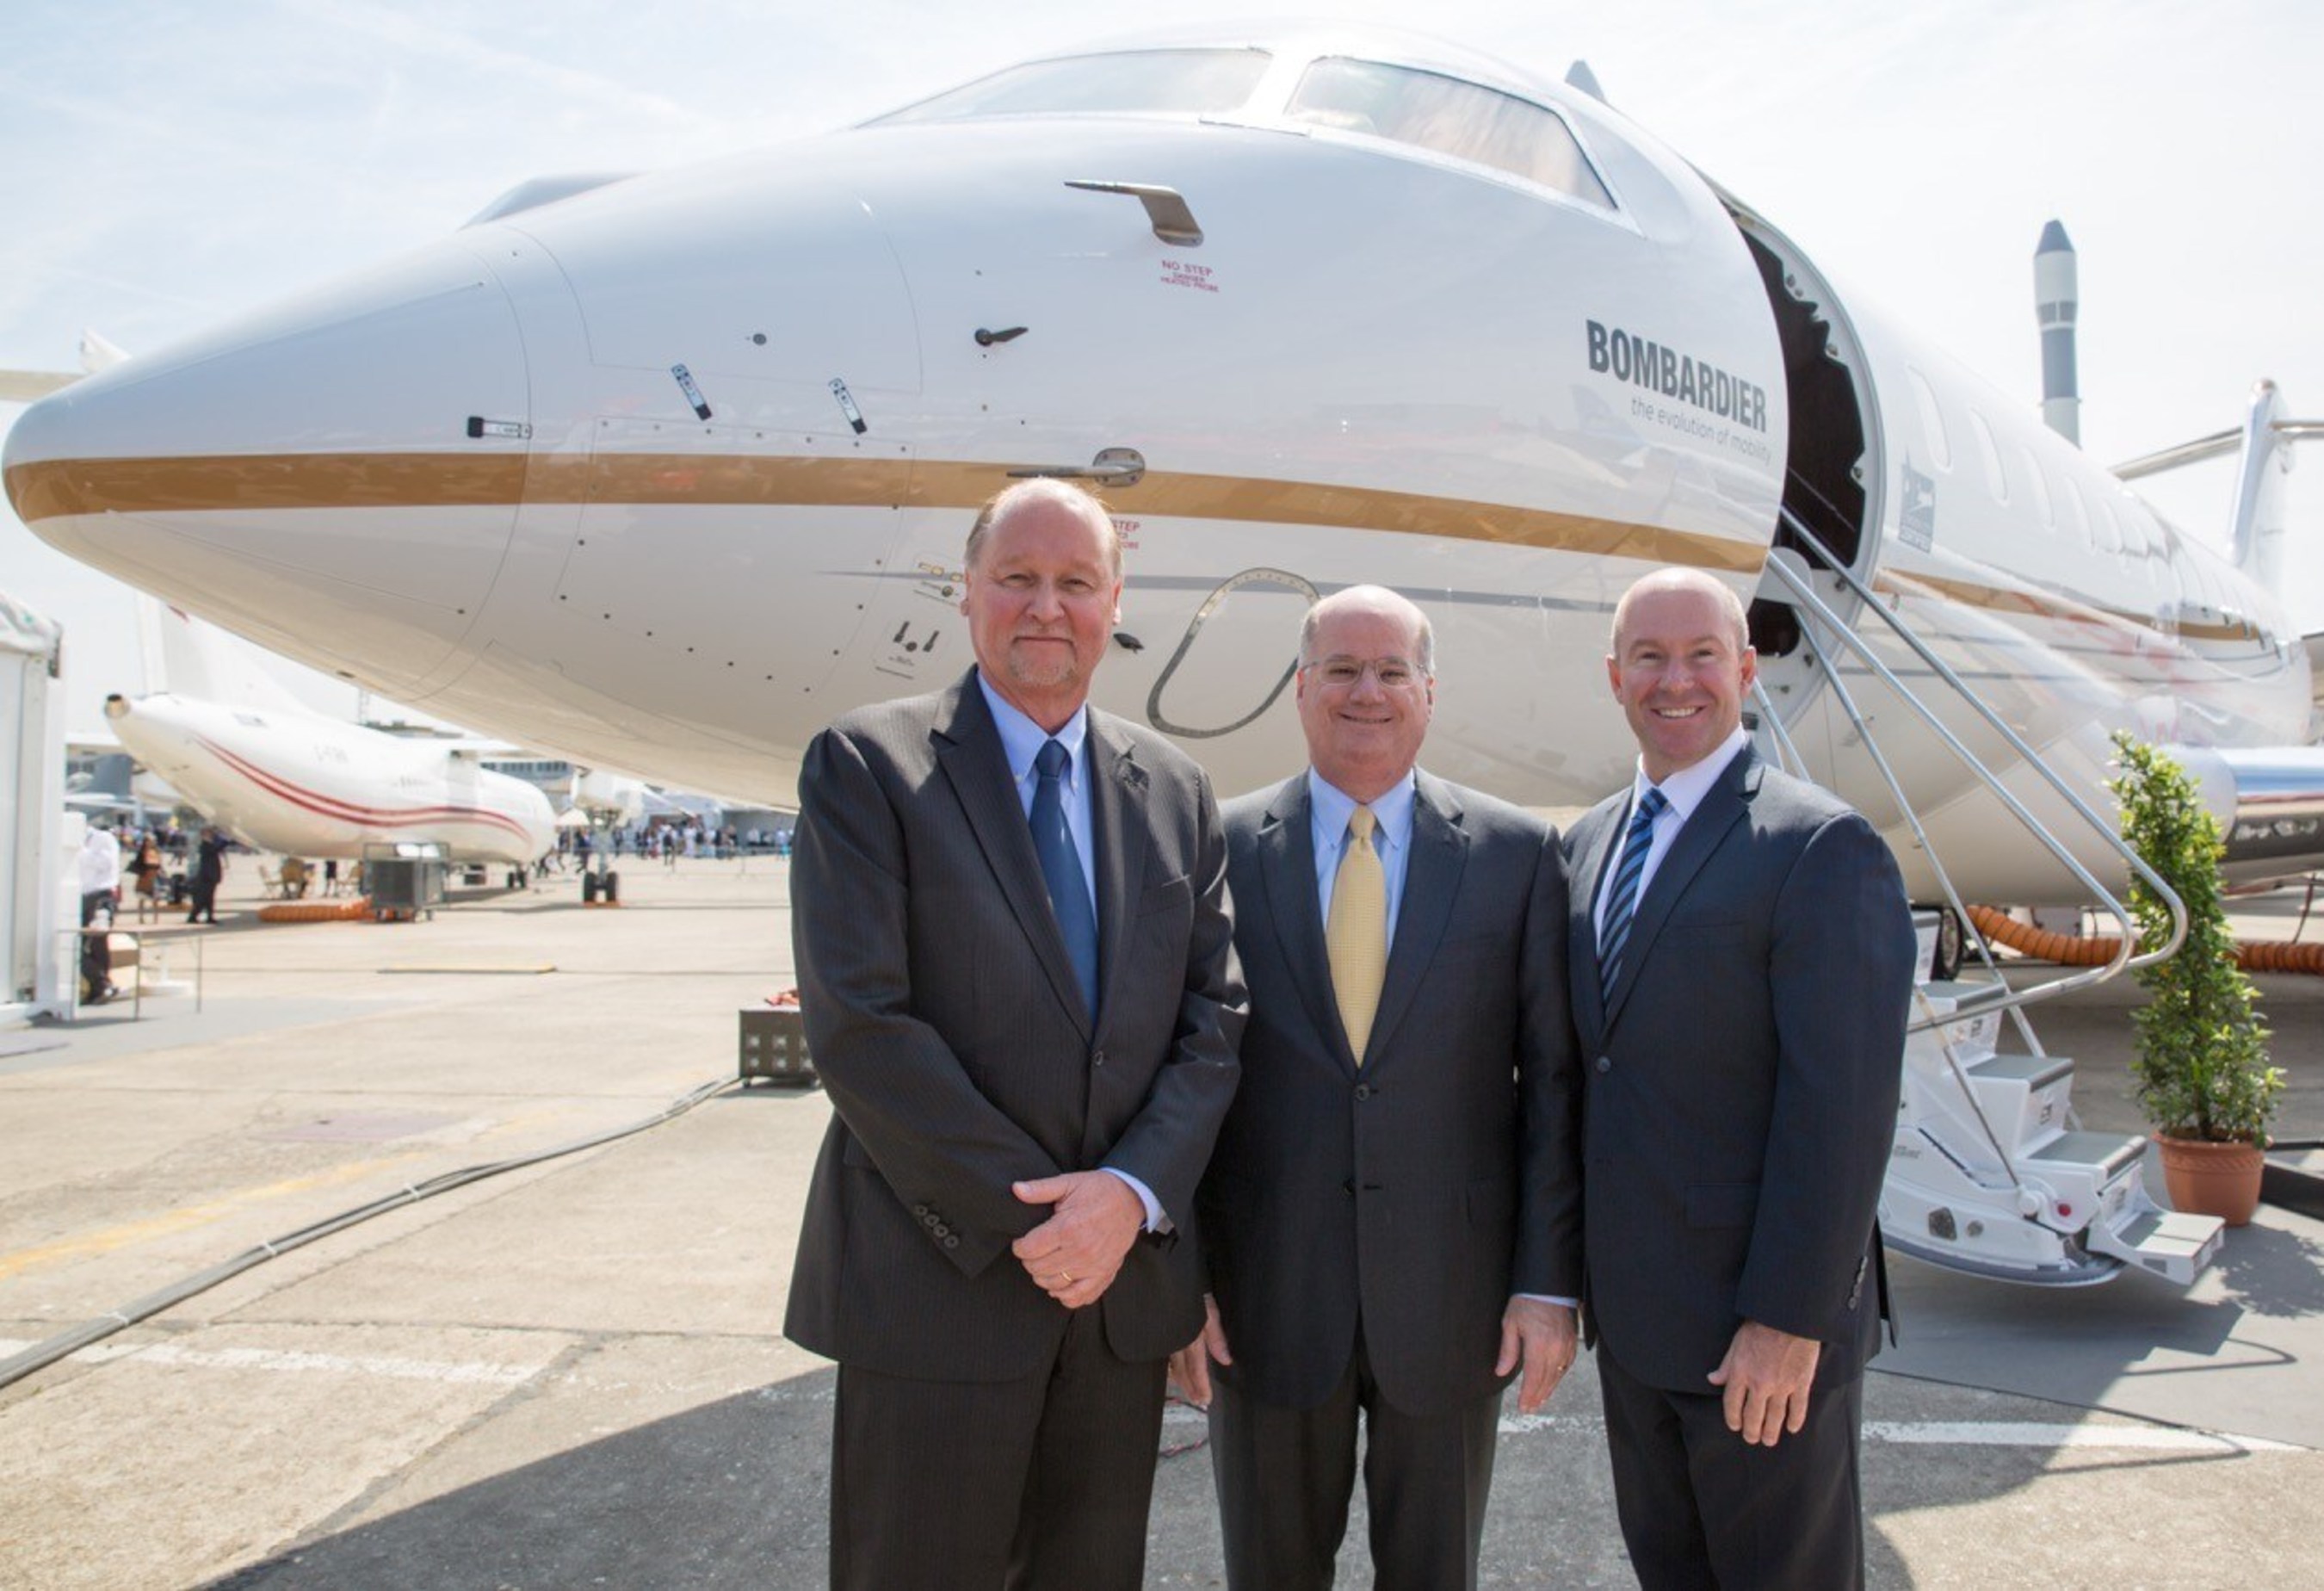 (from left to right) Rick Yuse, Raytheon, Orlando Carvalho, Lockheed Martin, and Alain Bellemare, Bombardier, meet at the Paris Air show, representing their best of breed team for the Air Force's JSTARS Recap program.